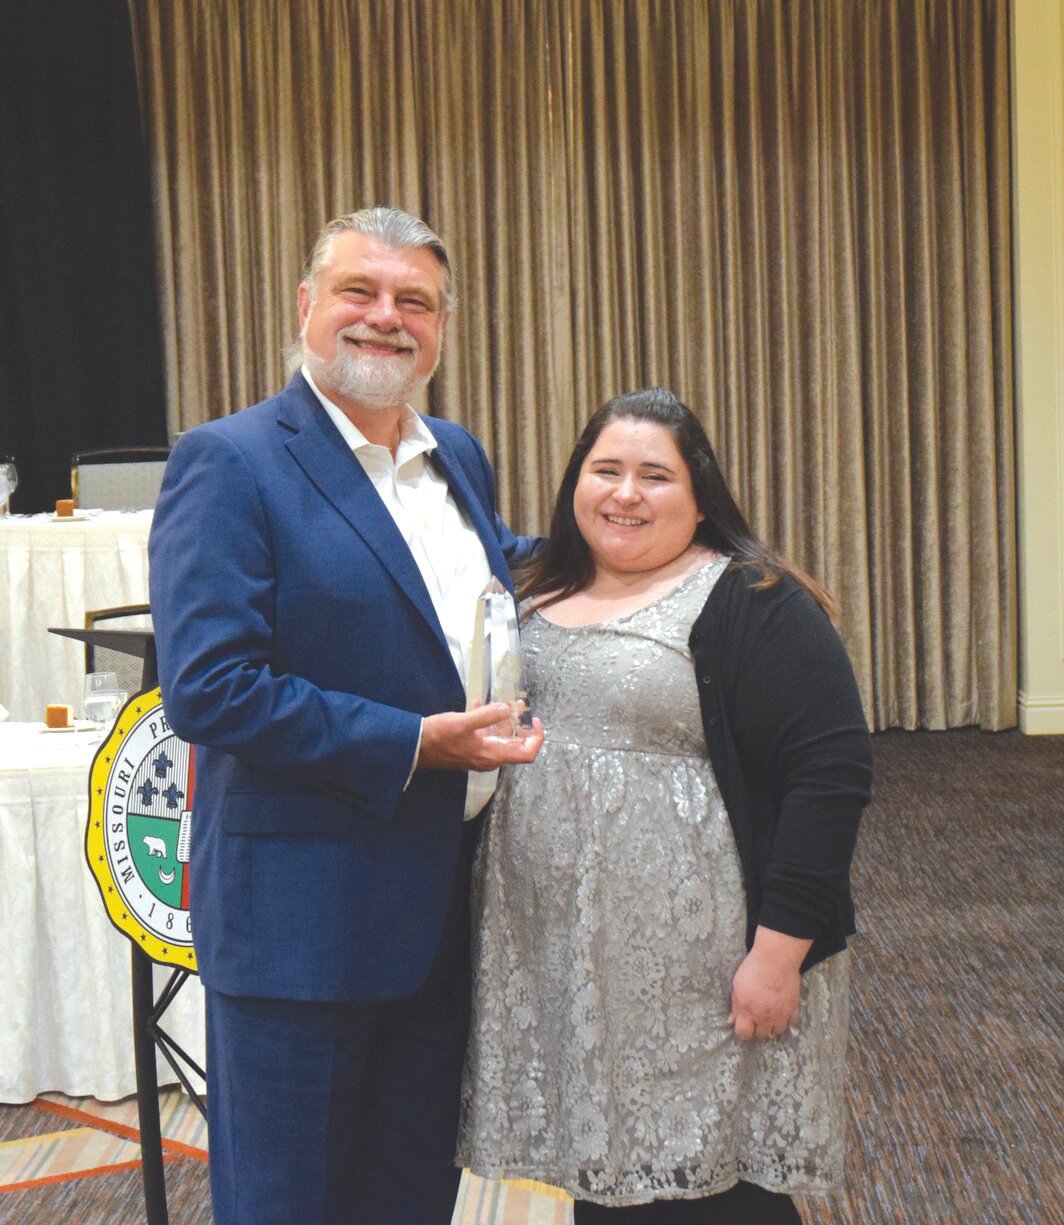 Laura White, daughter of Jane See White, accepted an award from the Missouri Press Association after her mother was inducted into the Missouri Press Hall of Fame.